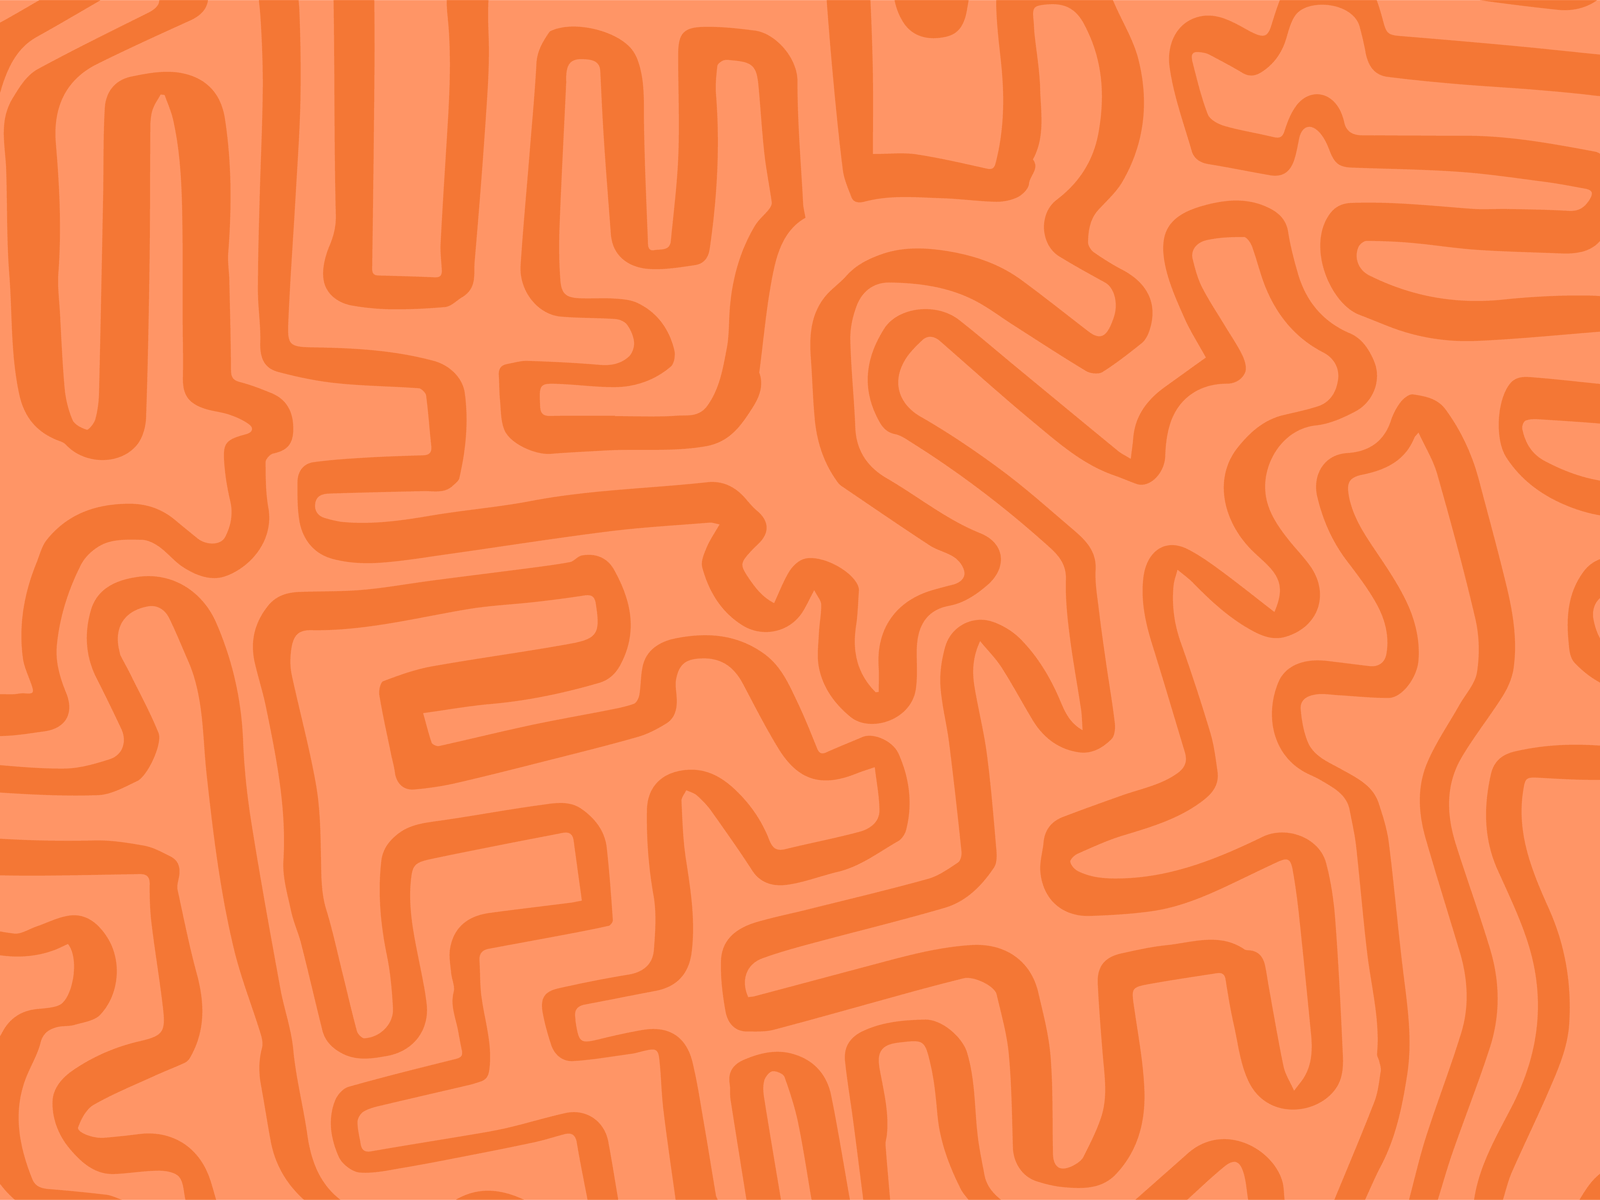 Pattern inspired by Keith Haring